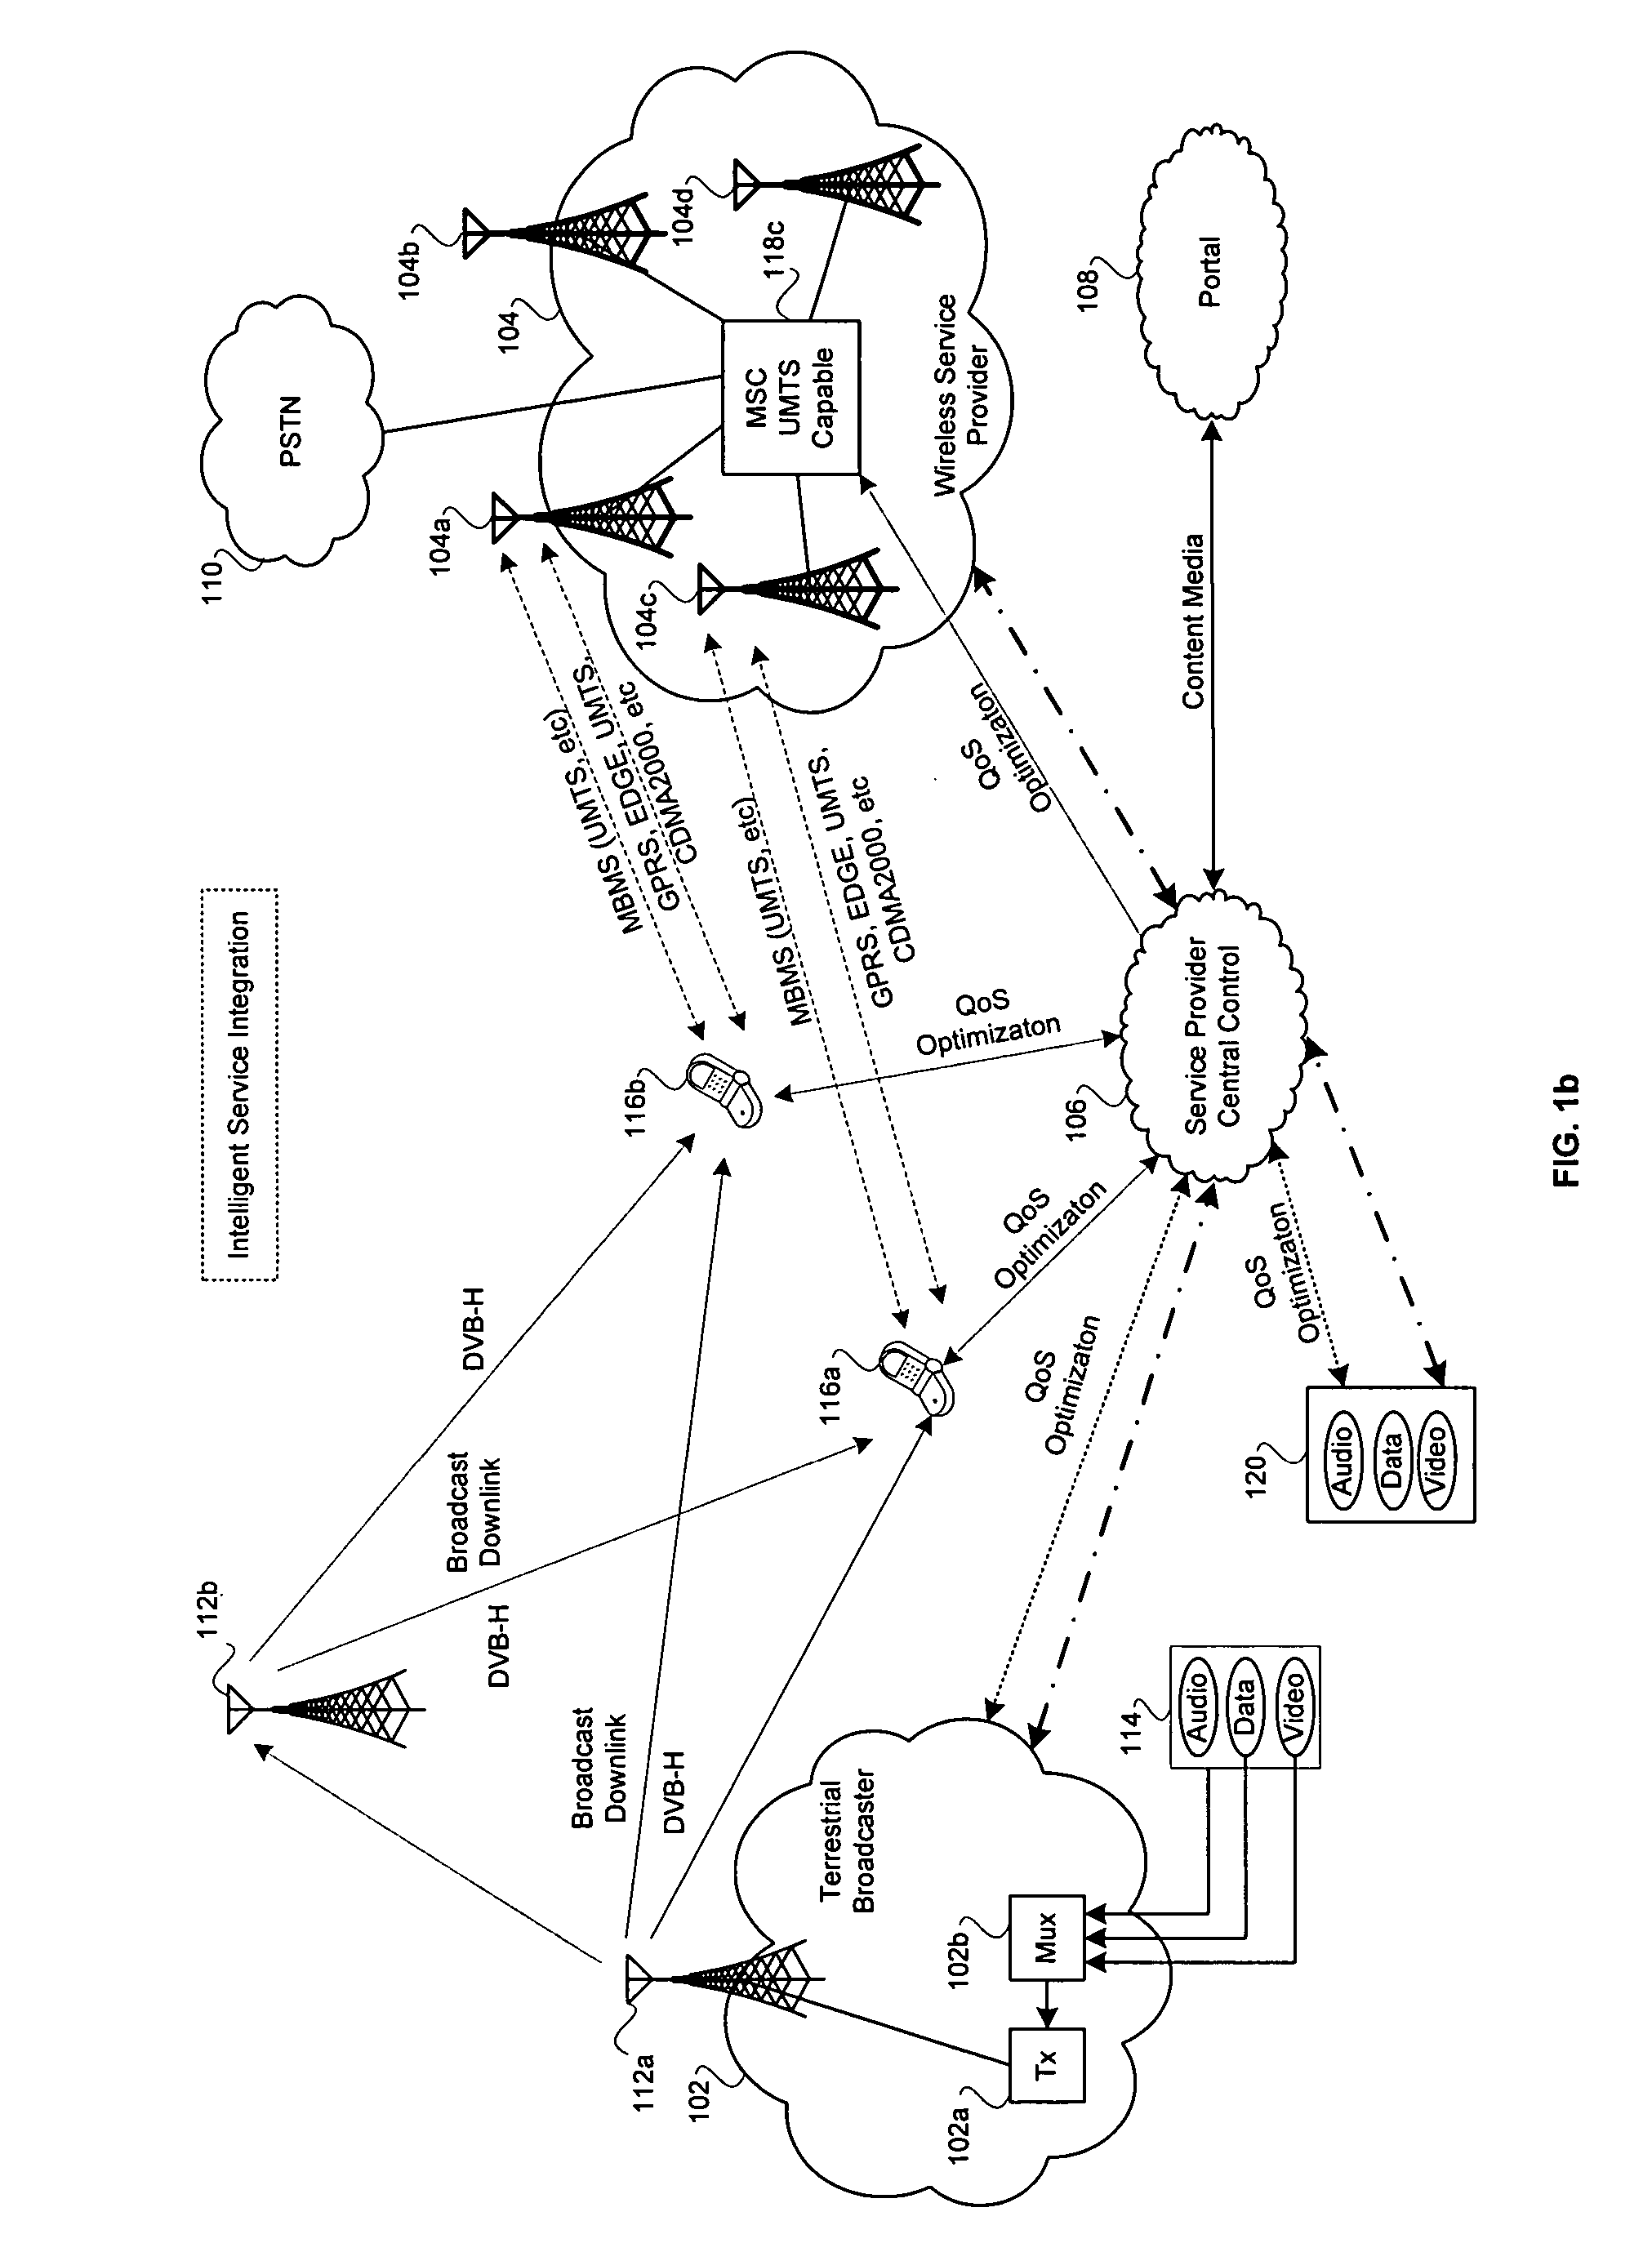 Method and system for cellular network and integrated broadcast television (TV) downlink with intelligent service control